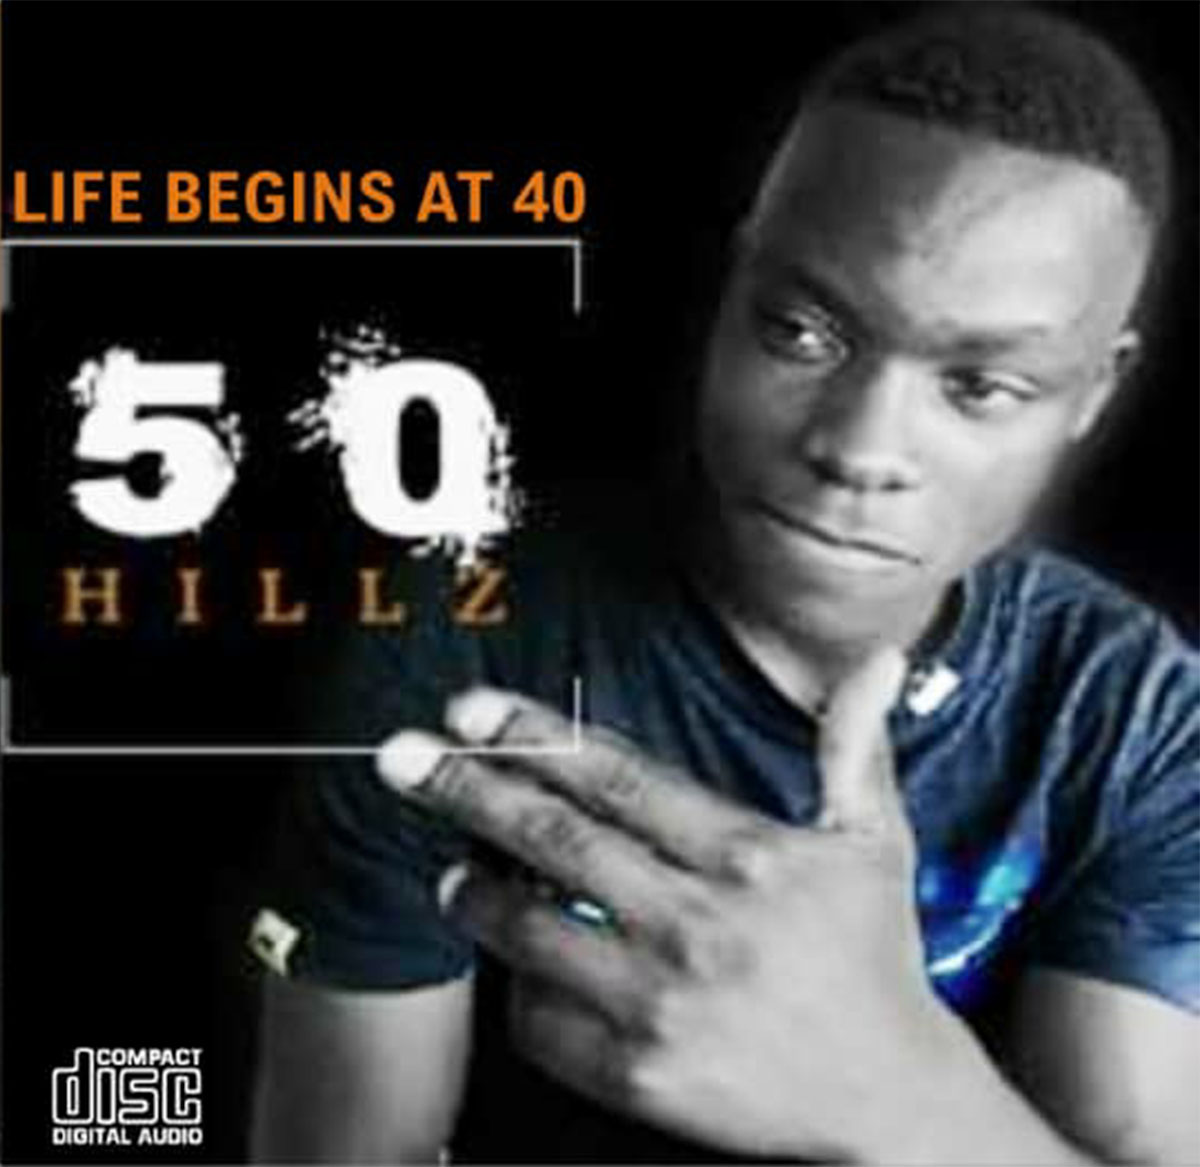 50 Hillz - Times are Getting Hard